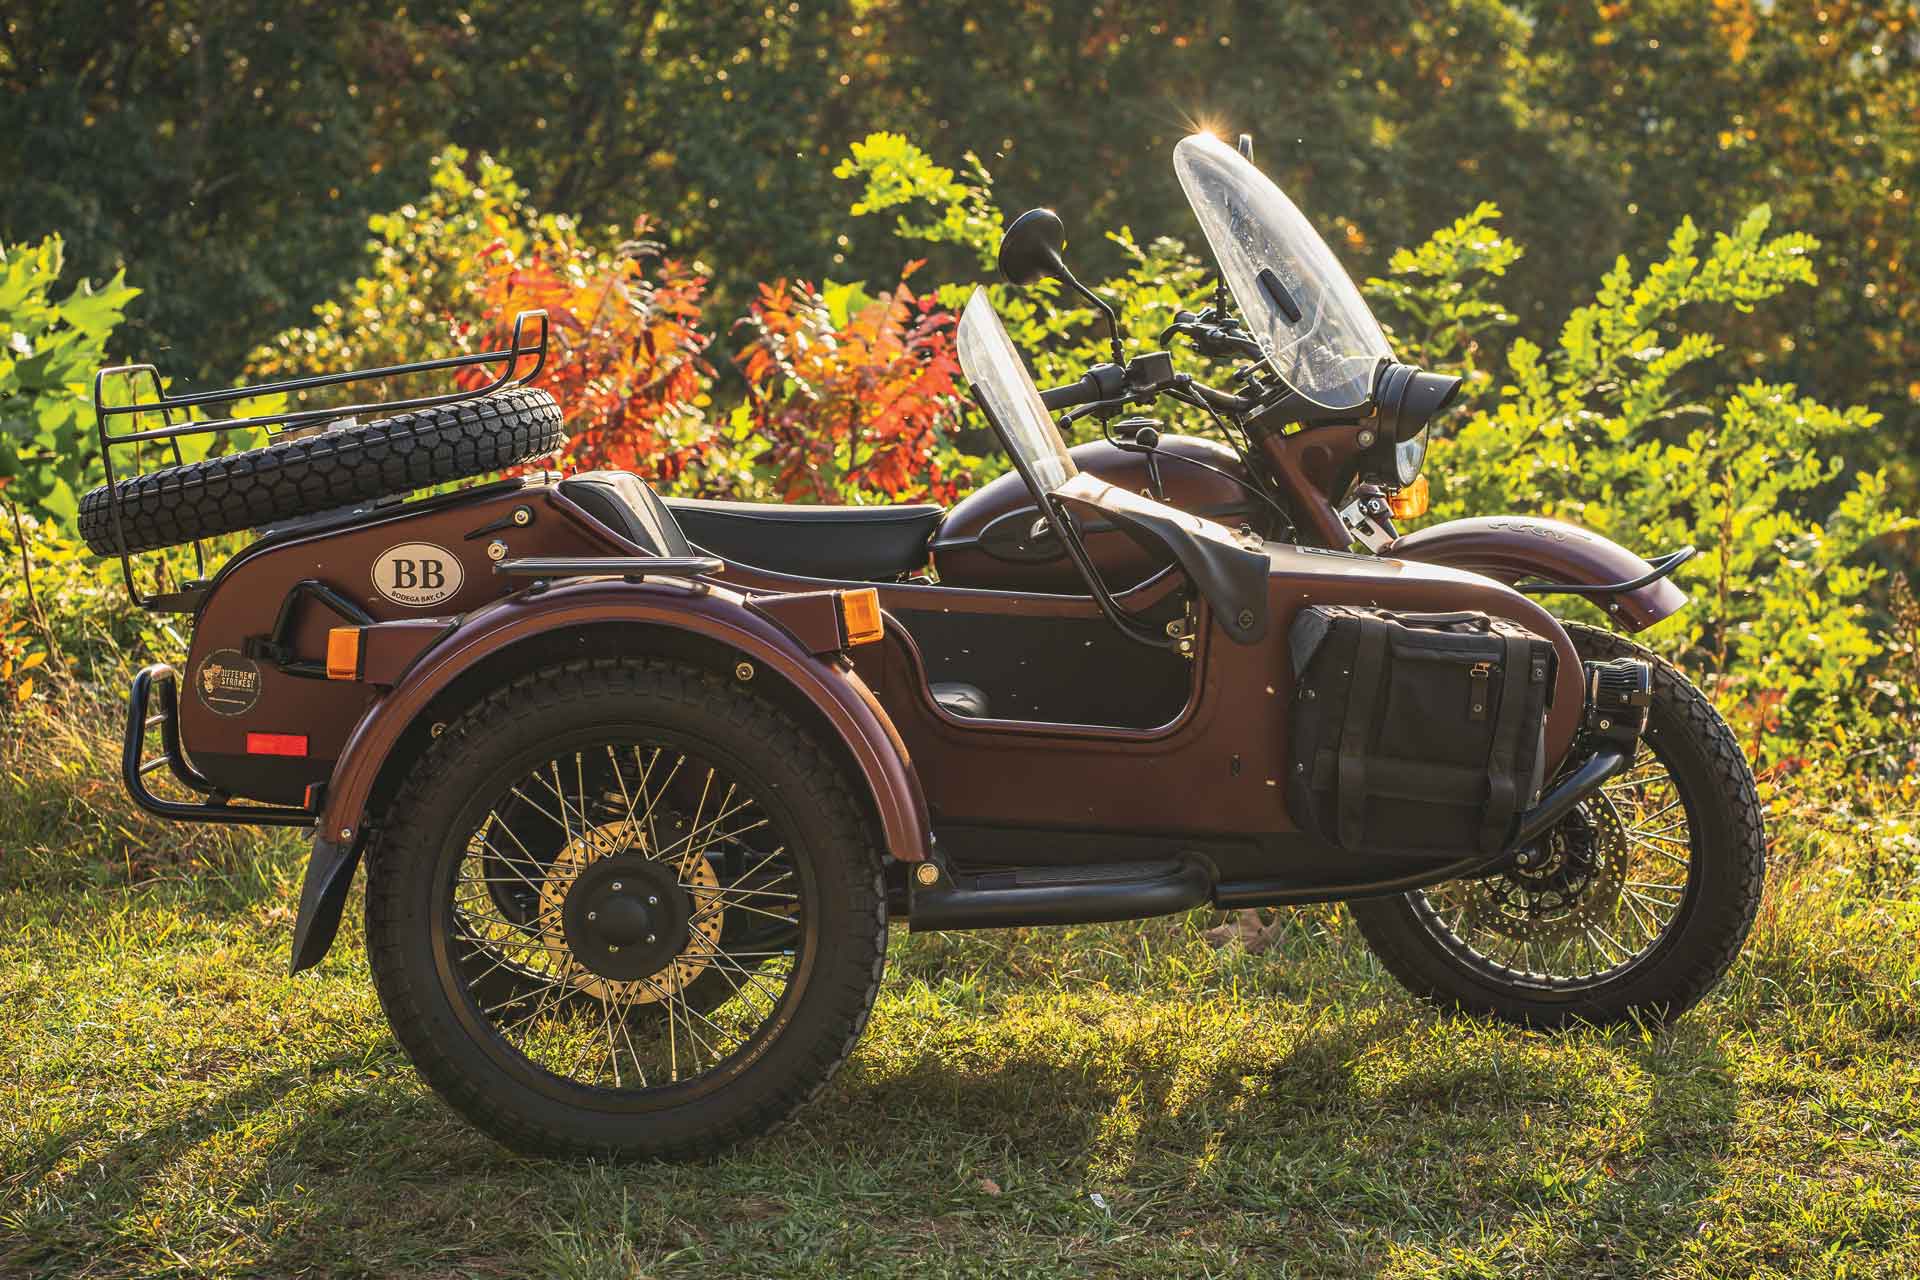 A burgundy motorcycle with a sidecar